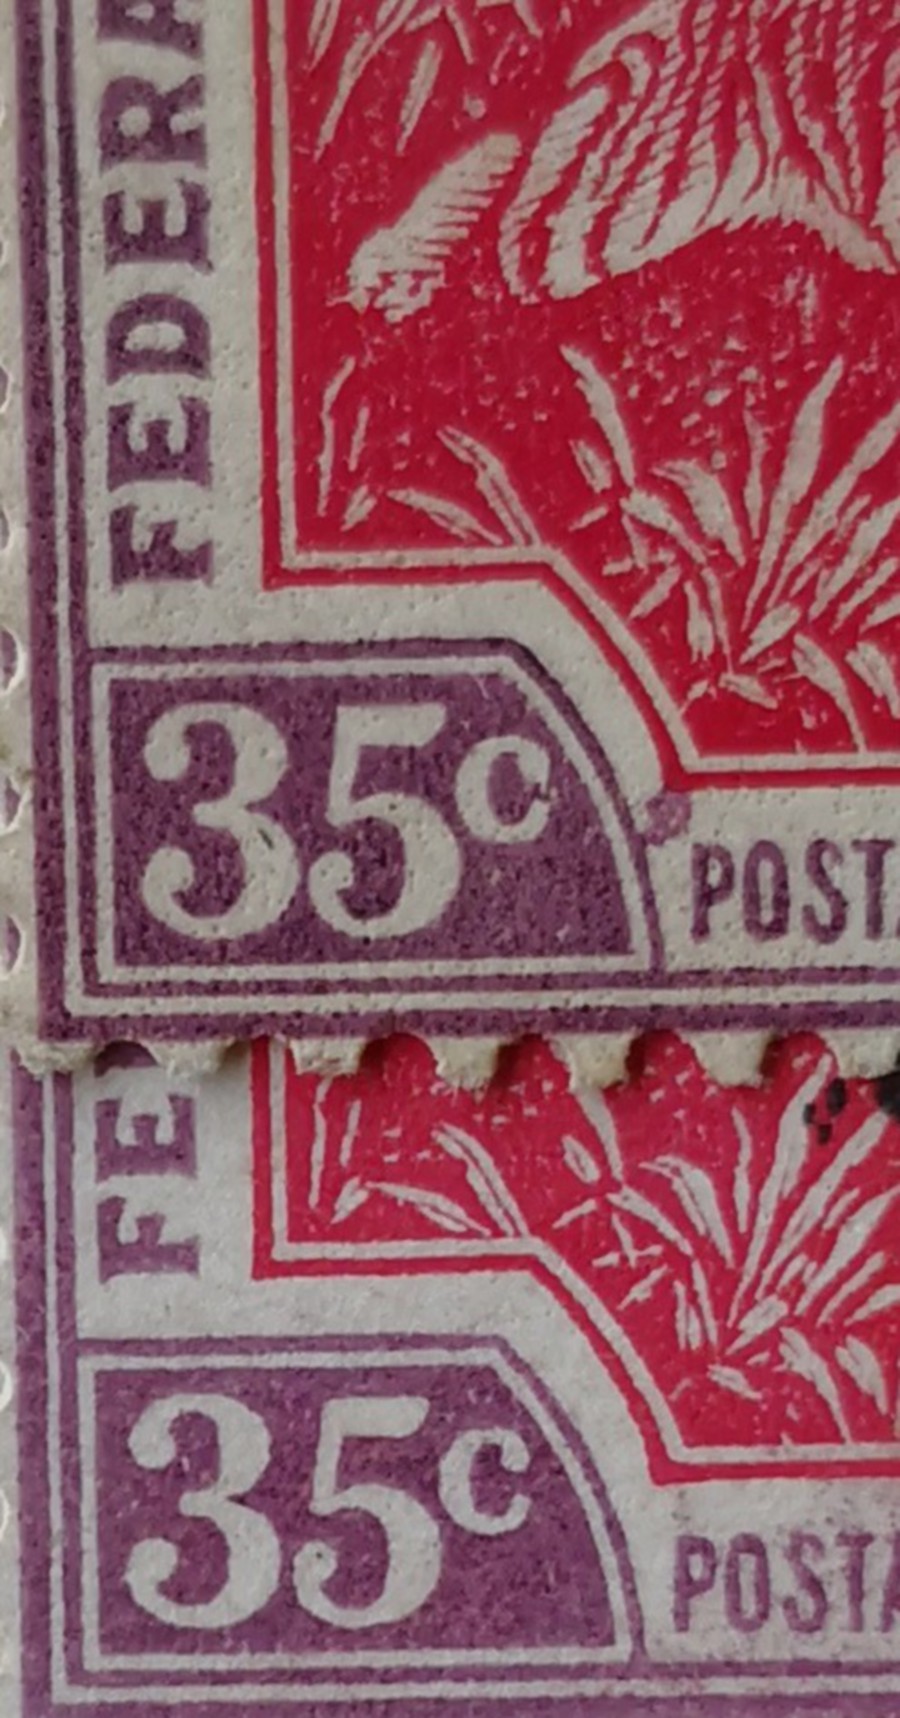 The misprinted stamp on top bears a purple smudge near the letter P while the normal stamp at the bottom doesn’t.